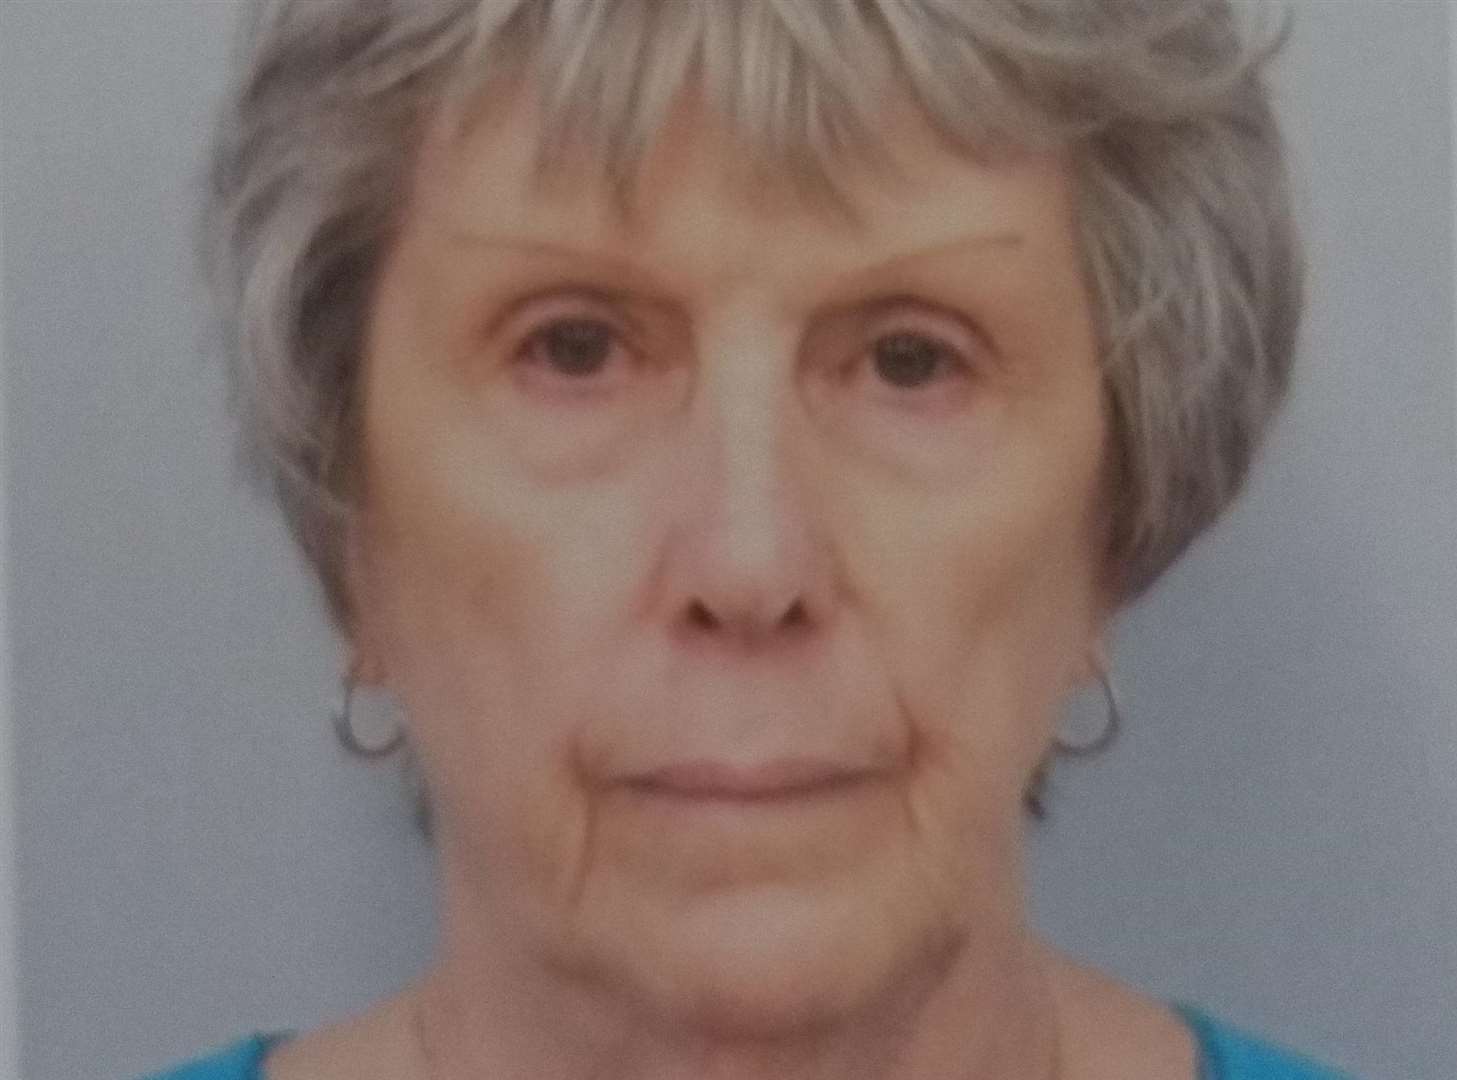 Margaret Lake had been reported missing